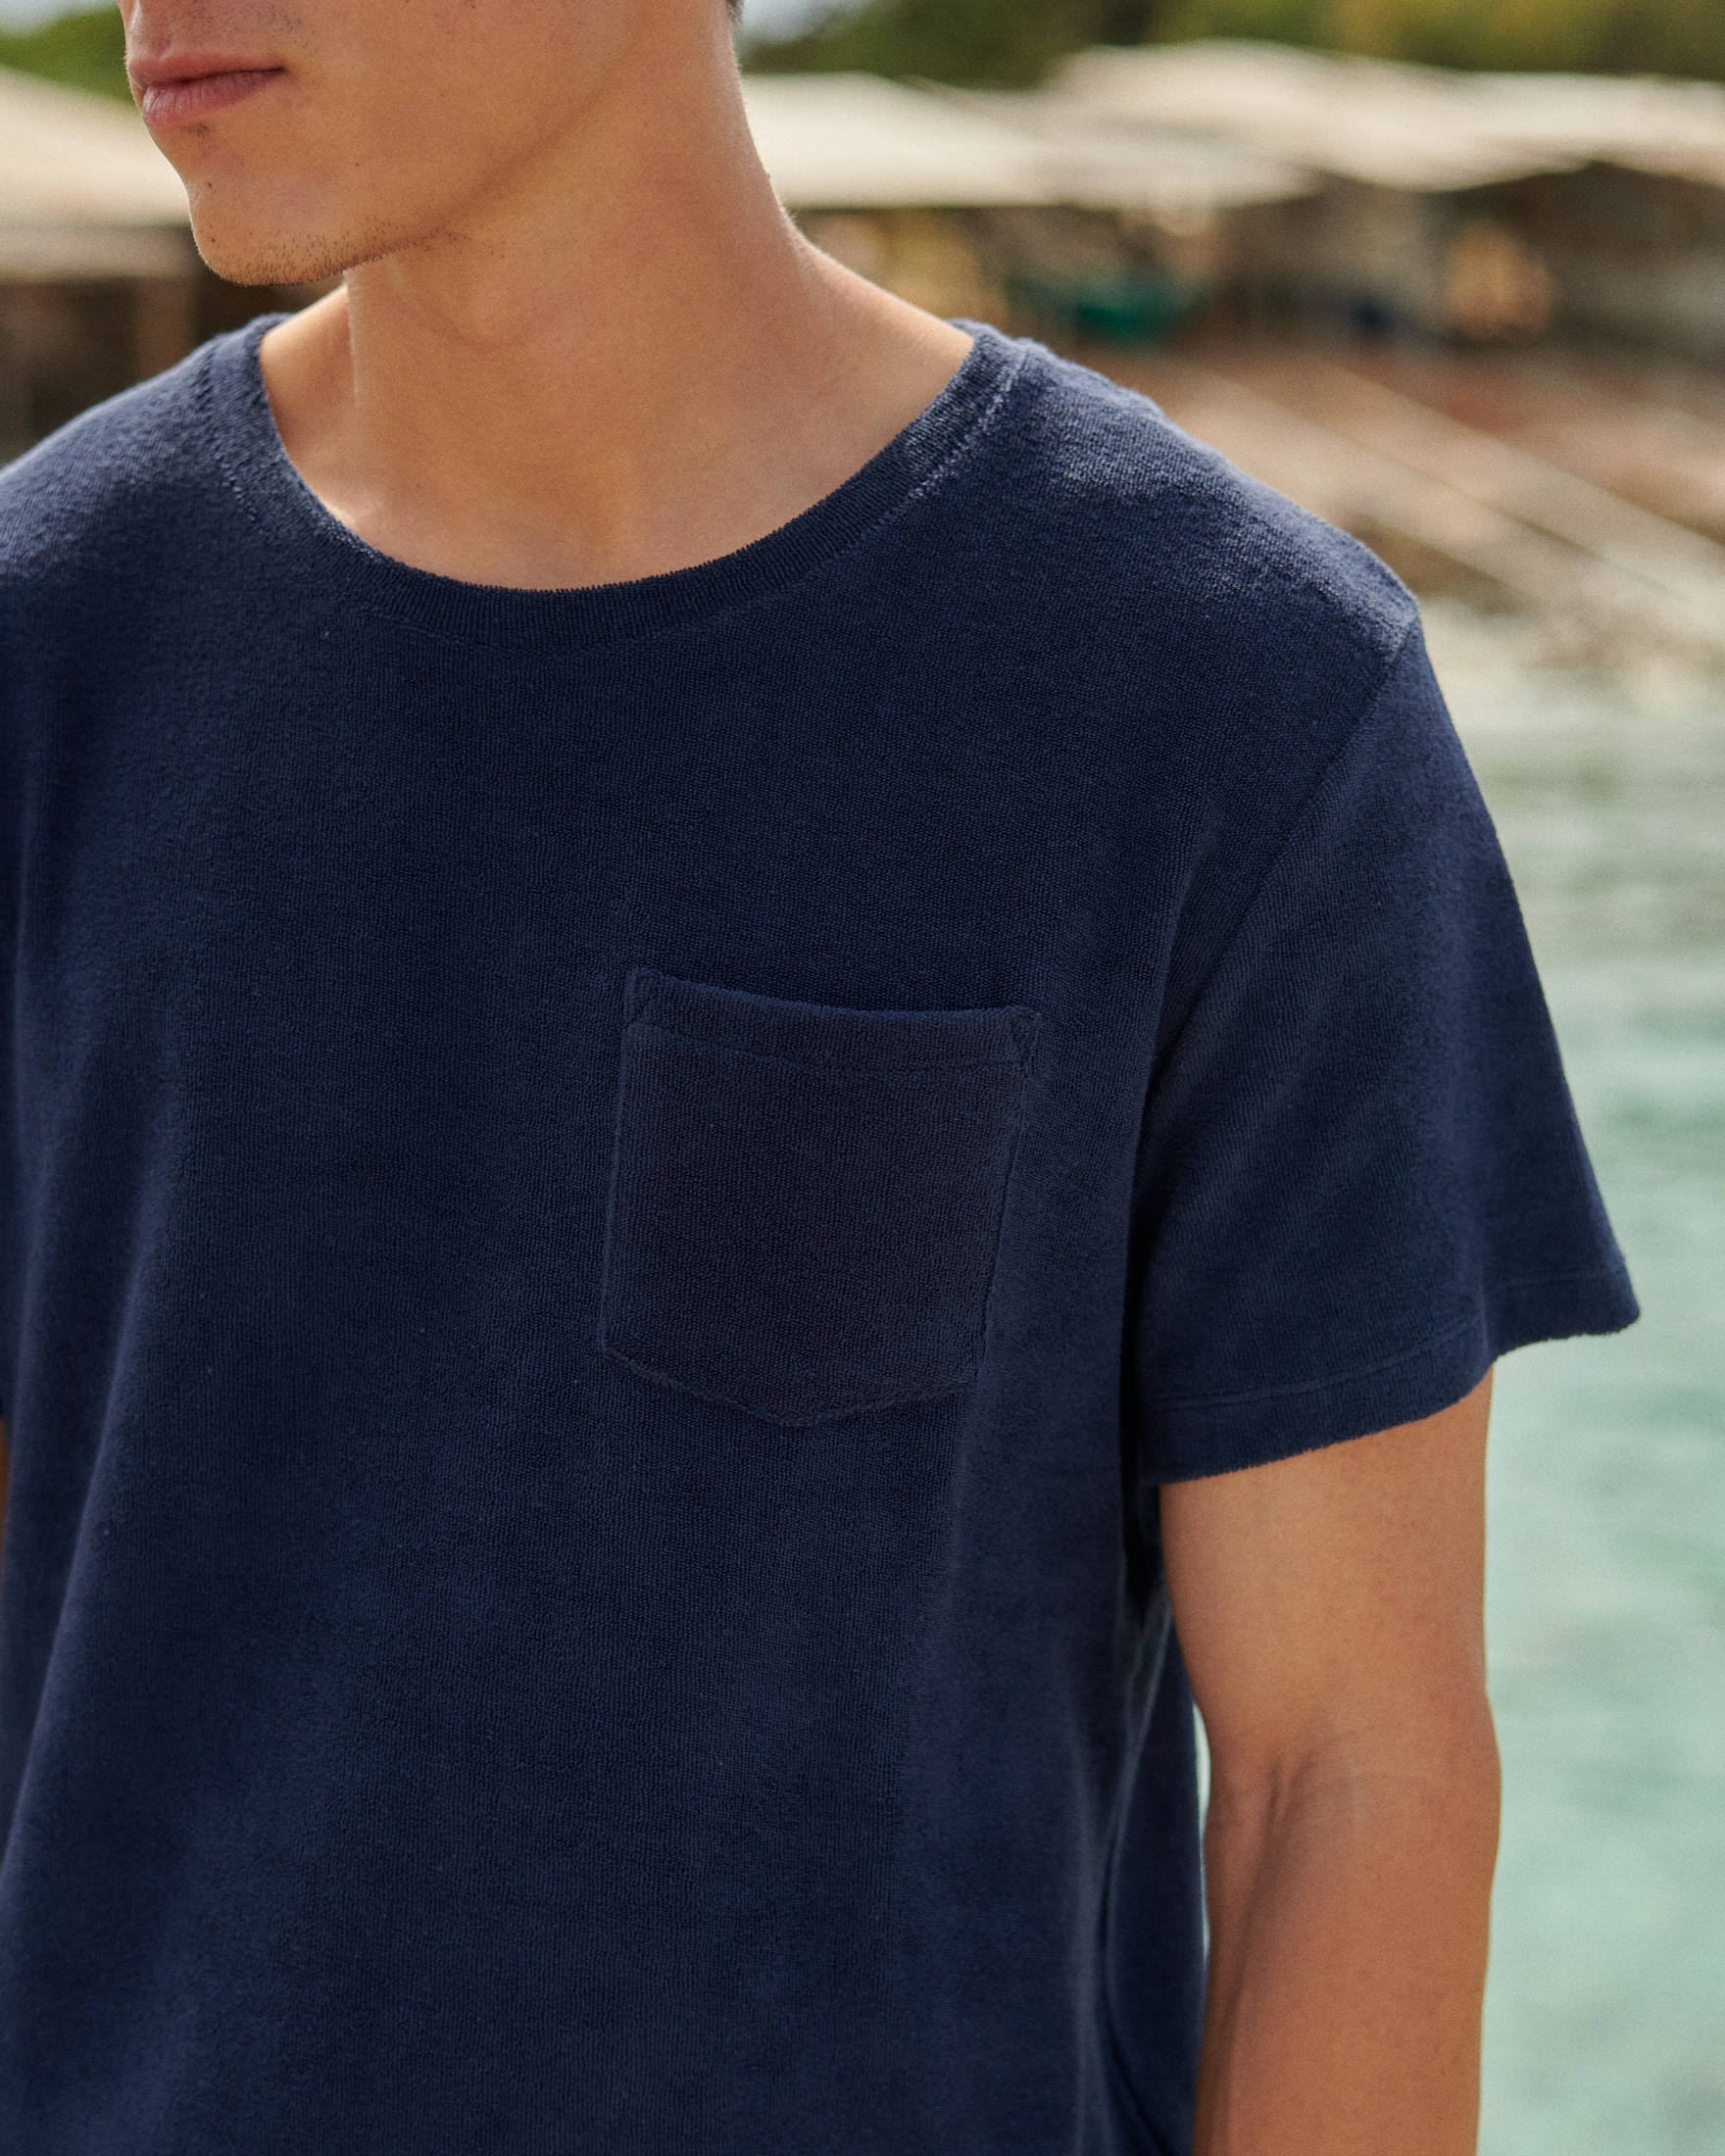 Emilio T-Shirt - Made in Portugal - Navy Terry Cotton